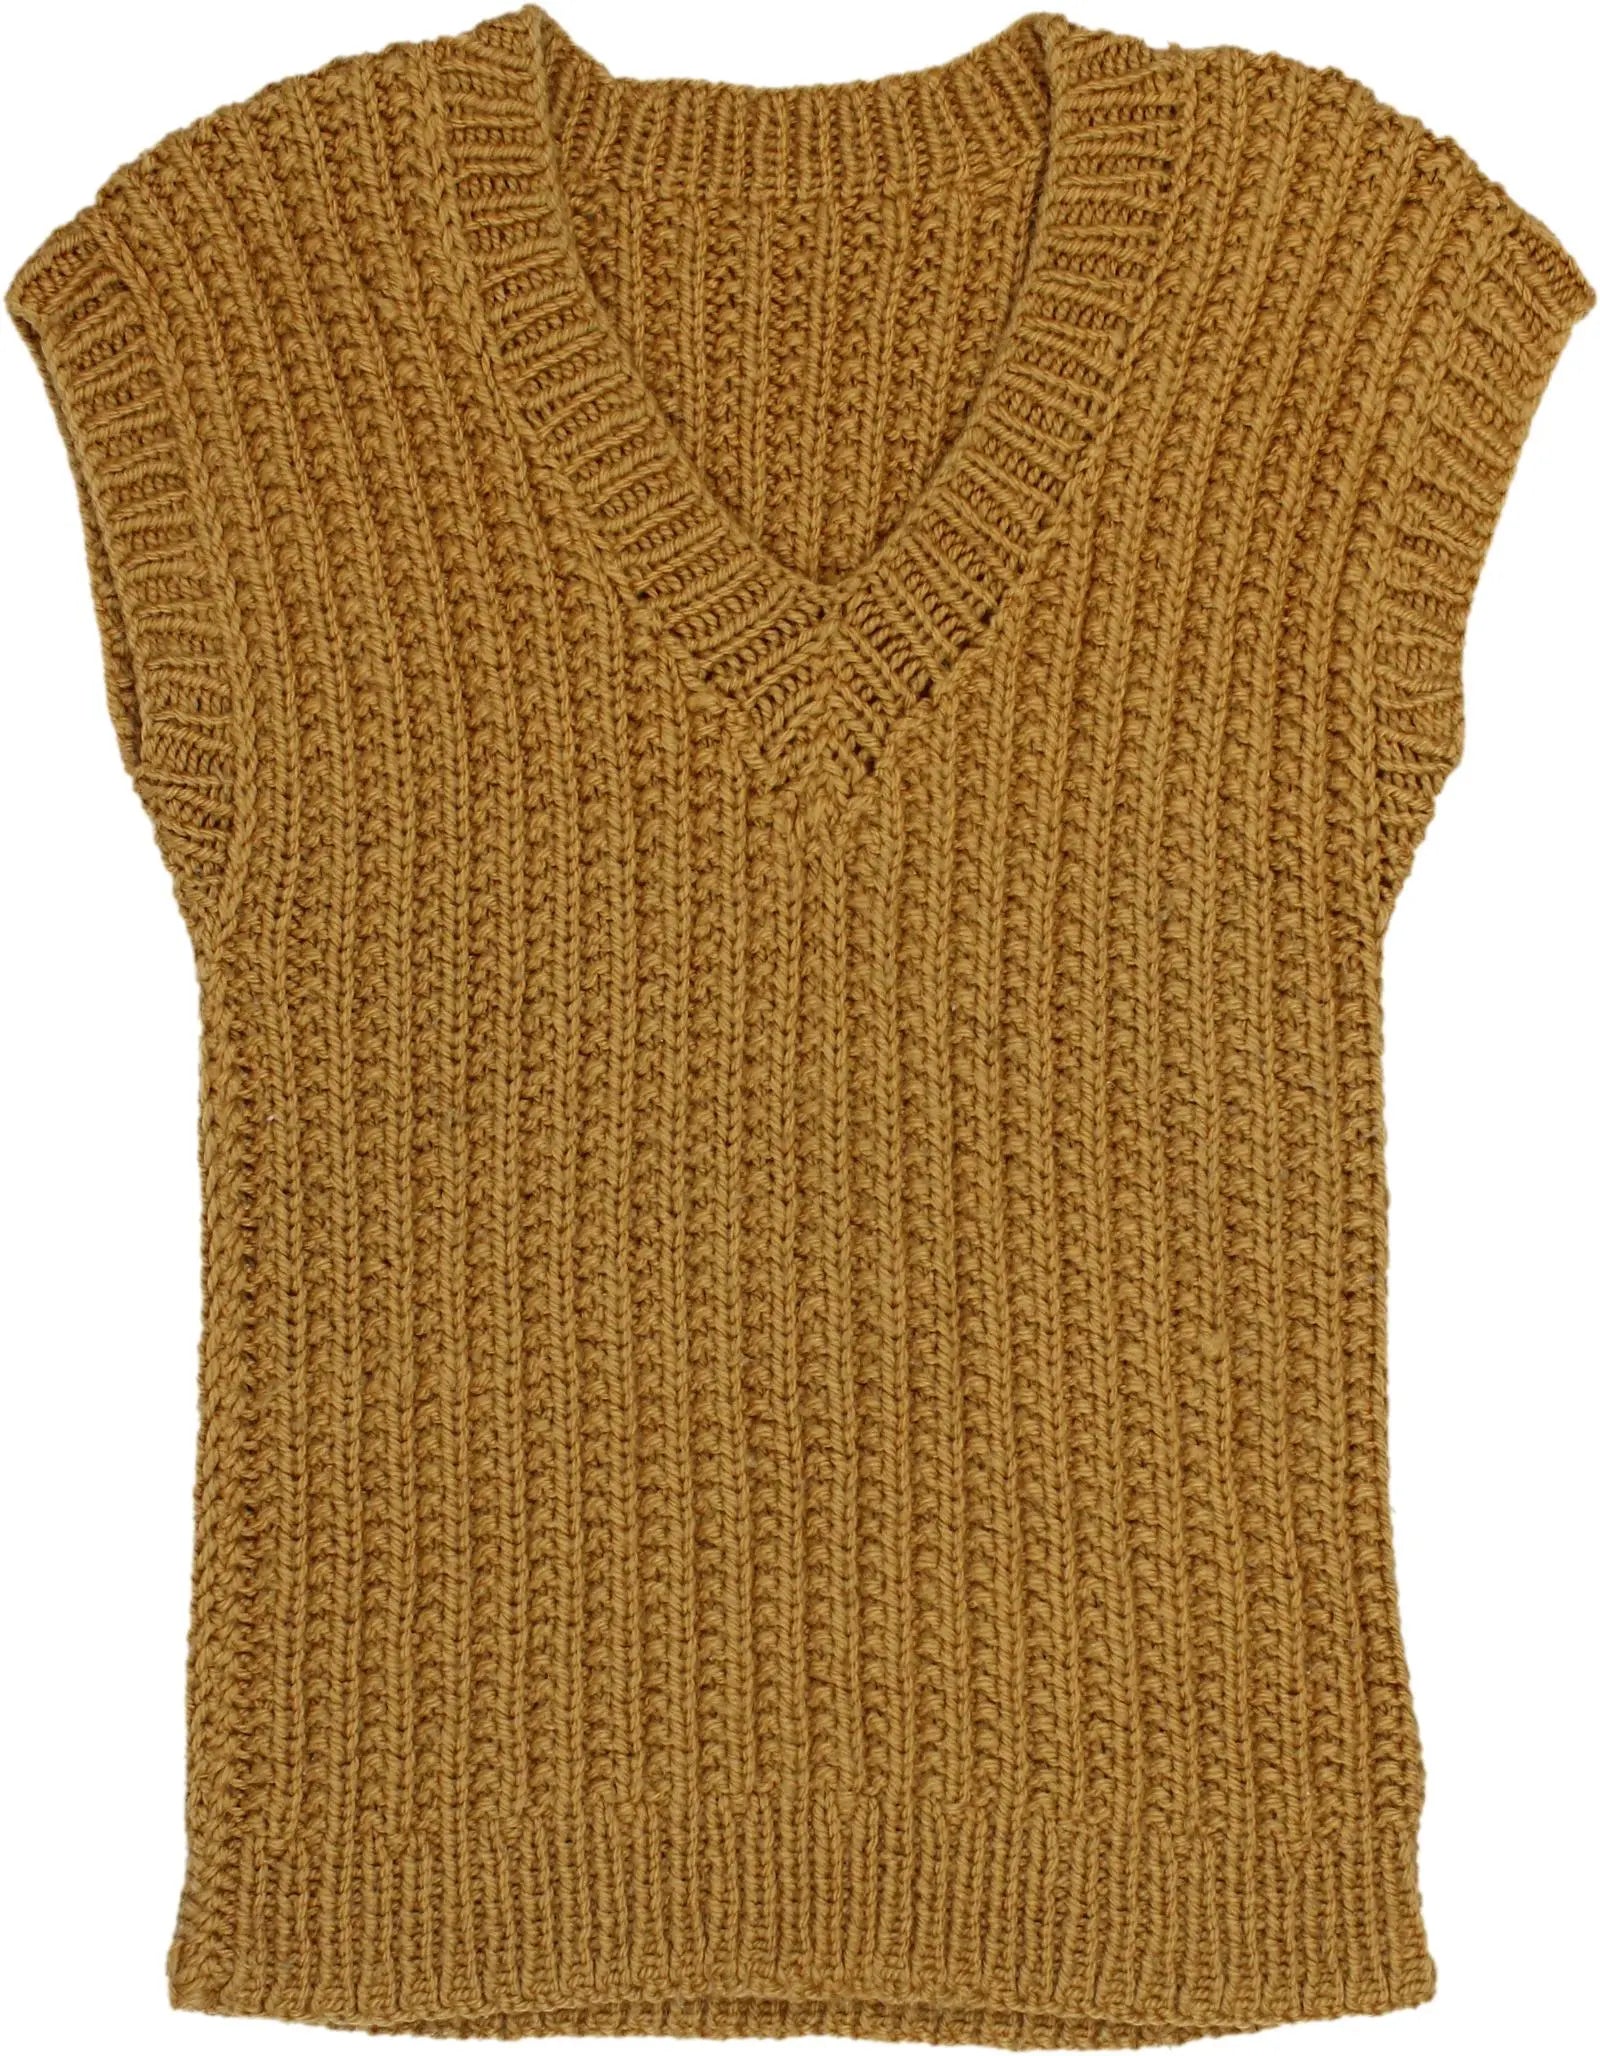 Handmade - Chuncky Knit Sweater Vest- ThriftTale.com - Vintage and second handclothing